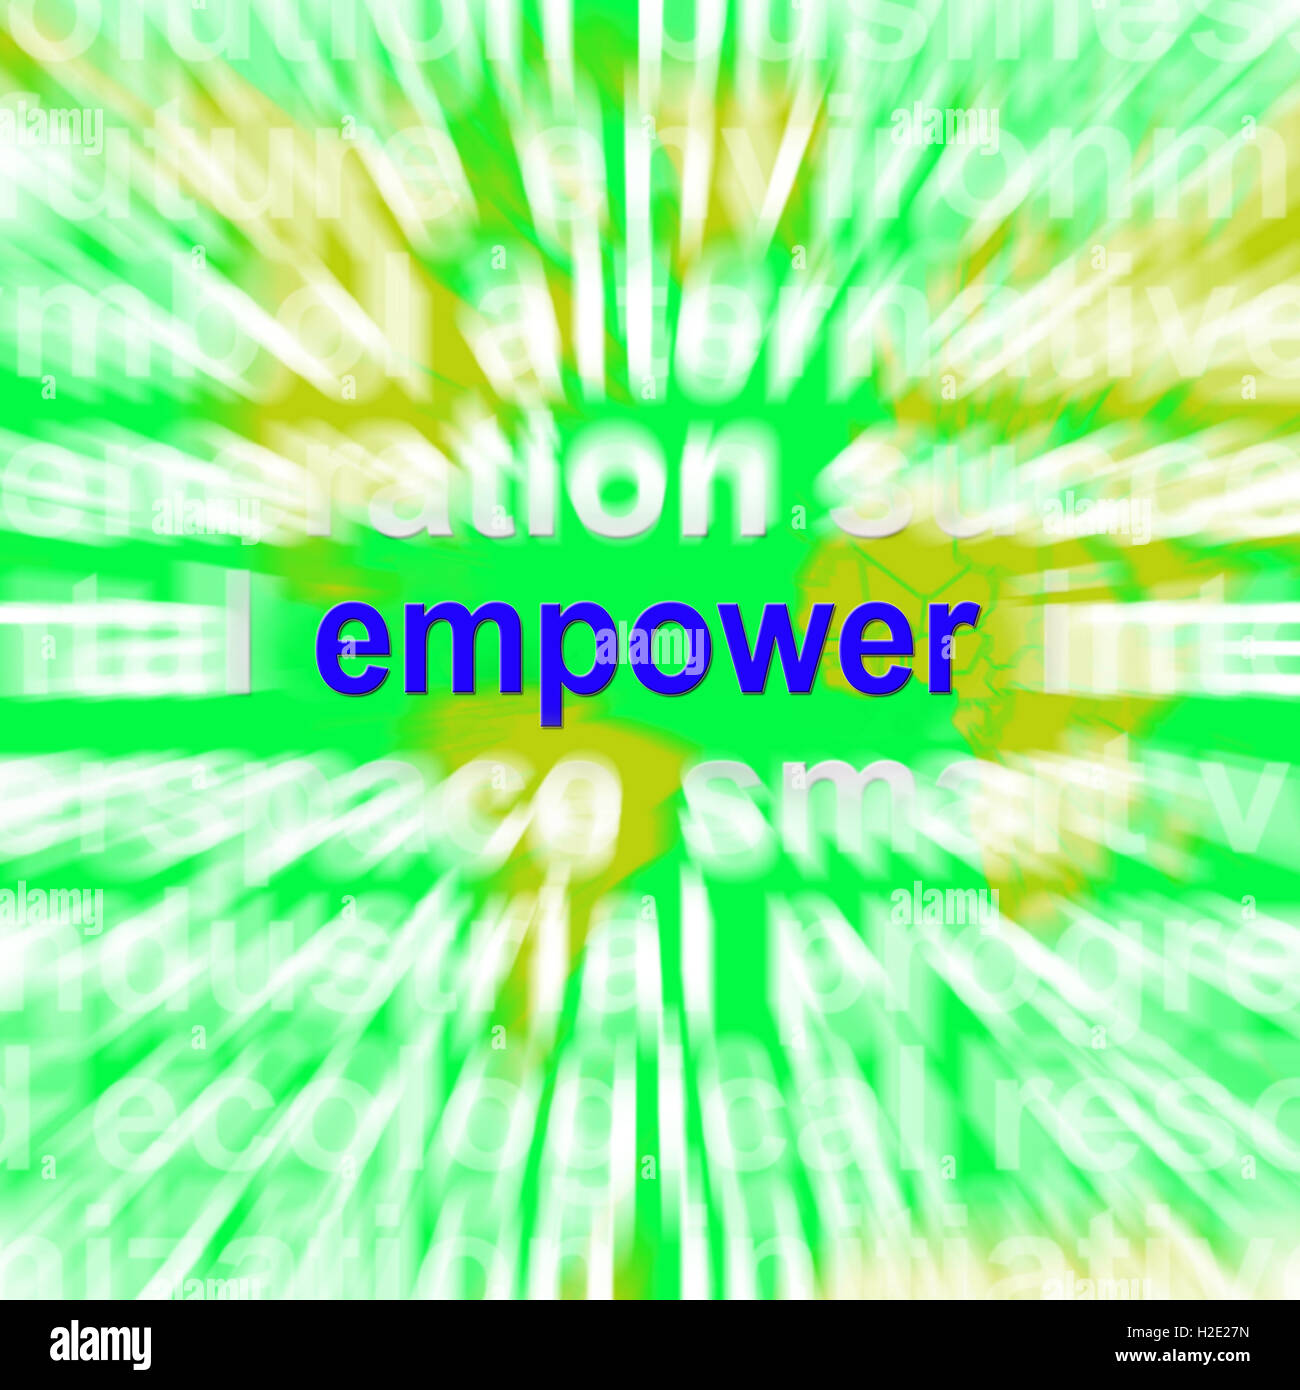 Empower Word Cloud Means Encourage Empowerment Stock Photo